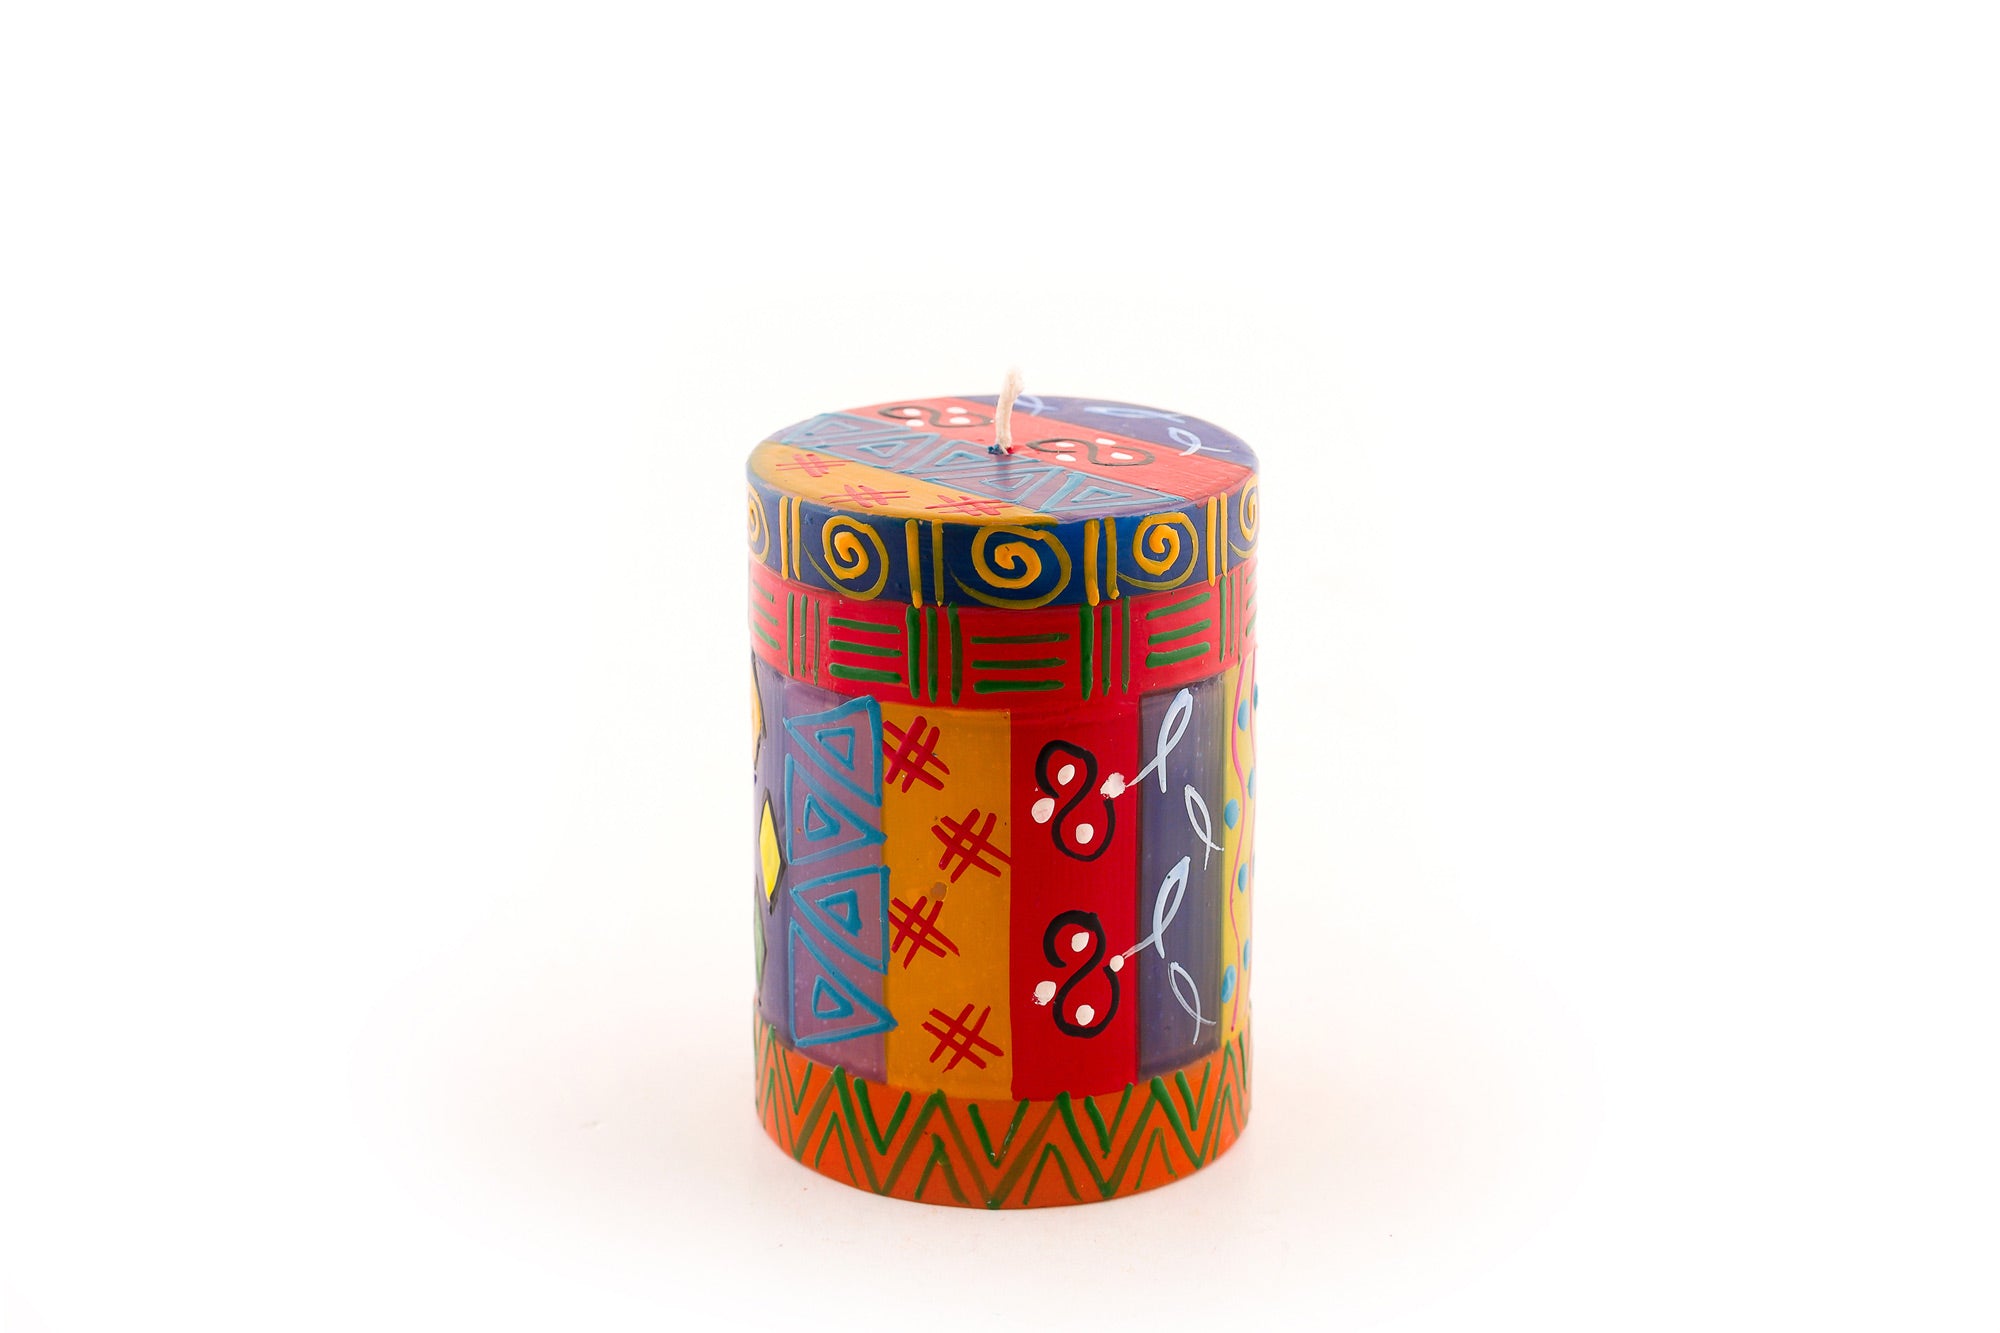 Multicolor 3x4 pillar candle. Bright, colorful, sunshine and fun designs that sing out Africa!